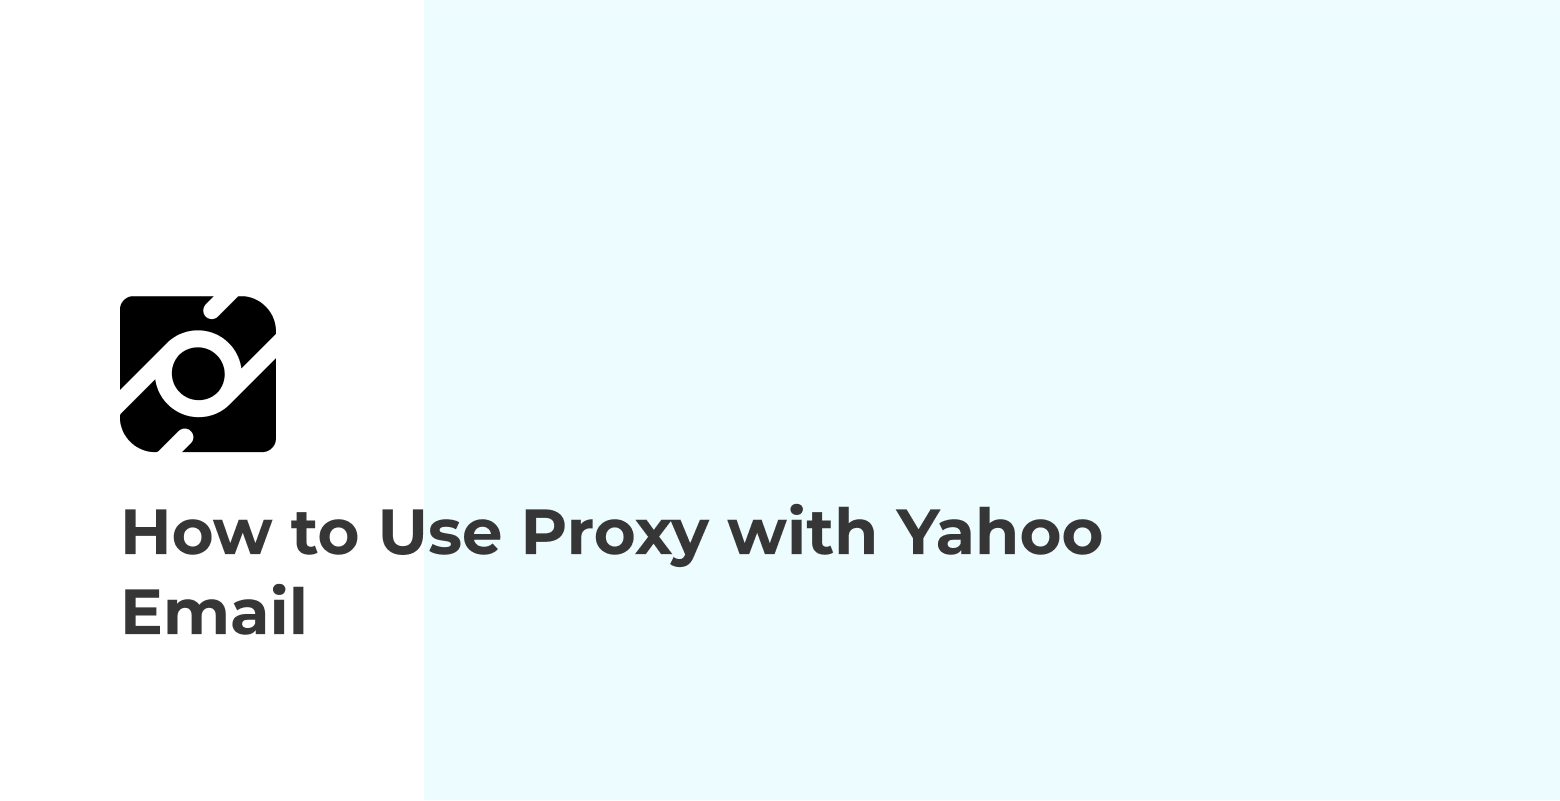 How to Use Proxy with Yahoo Email